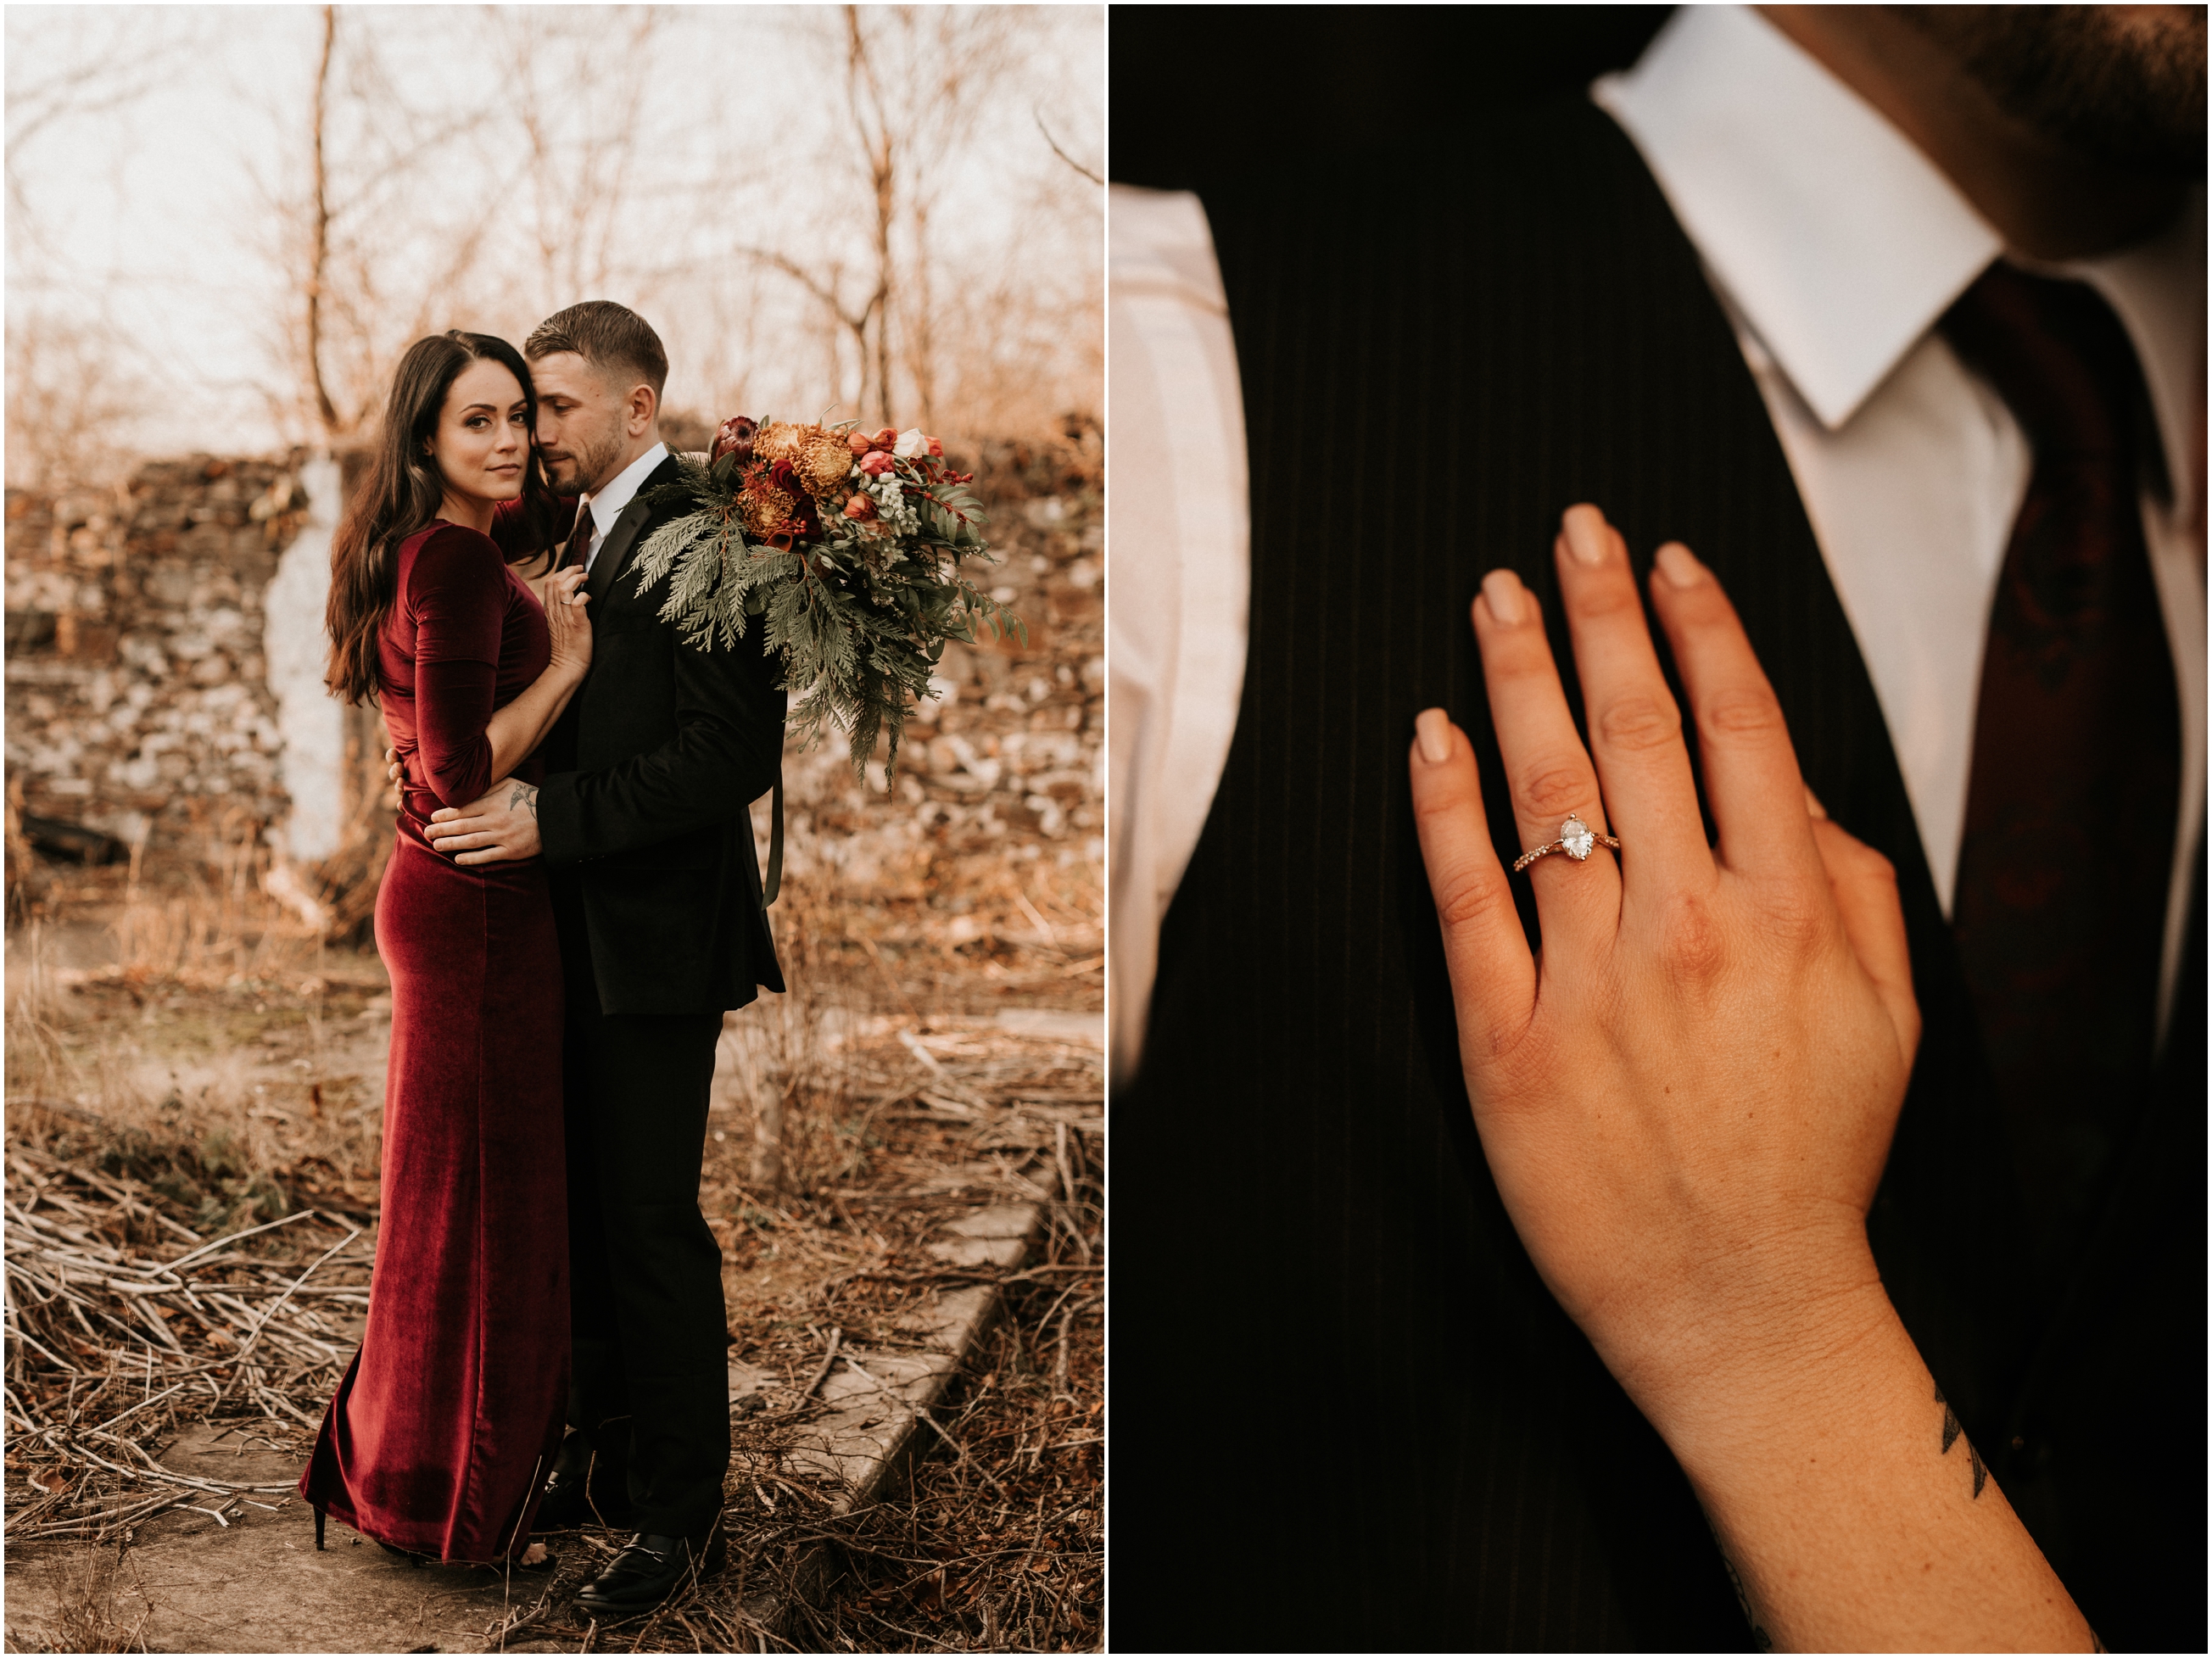 Stone Cottage Barn New Hope PA In Home Engagement Session Cozy Winter Christmas Holiday NJ Wedding Photographer